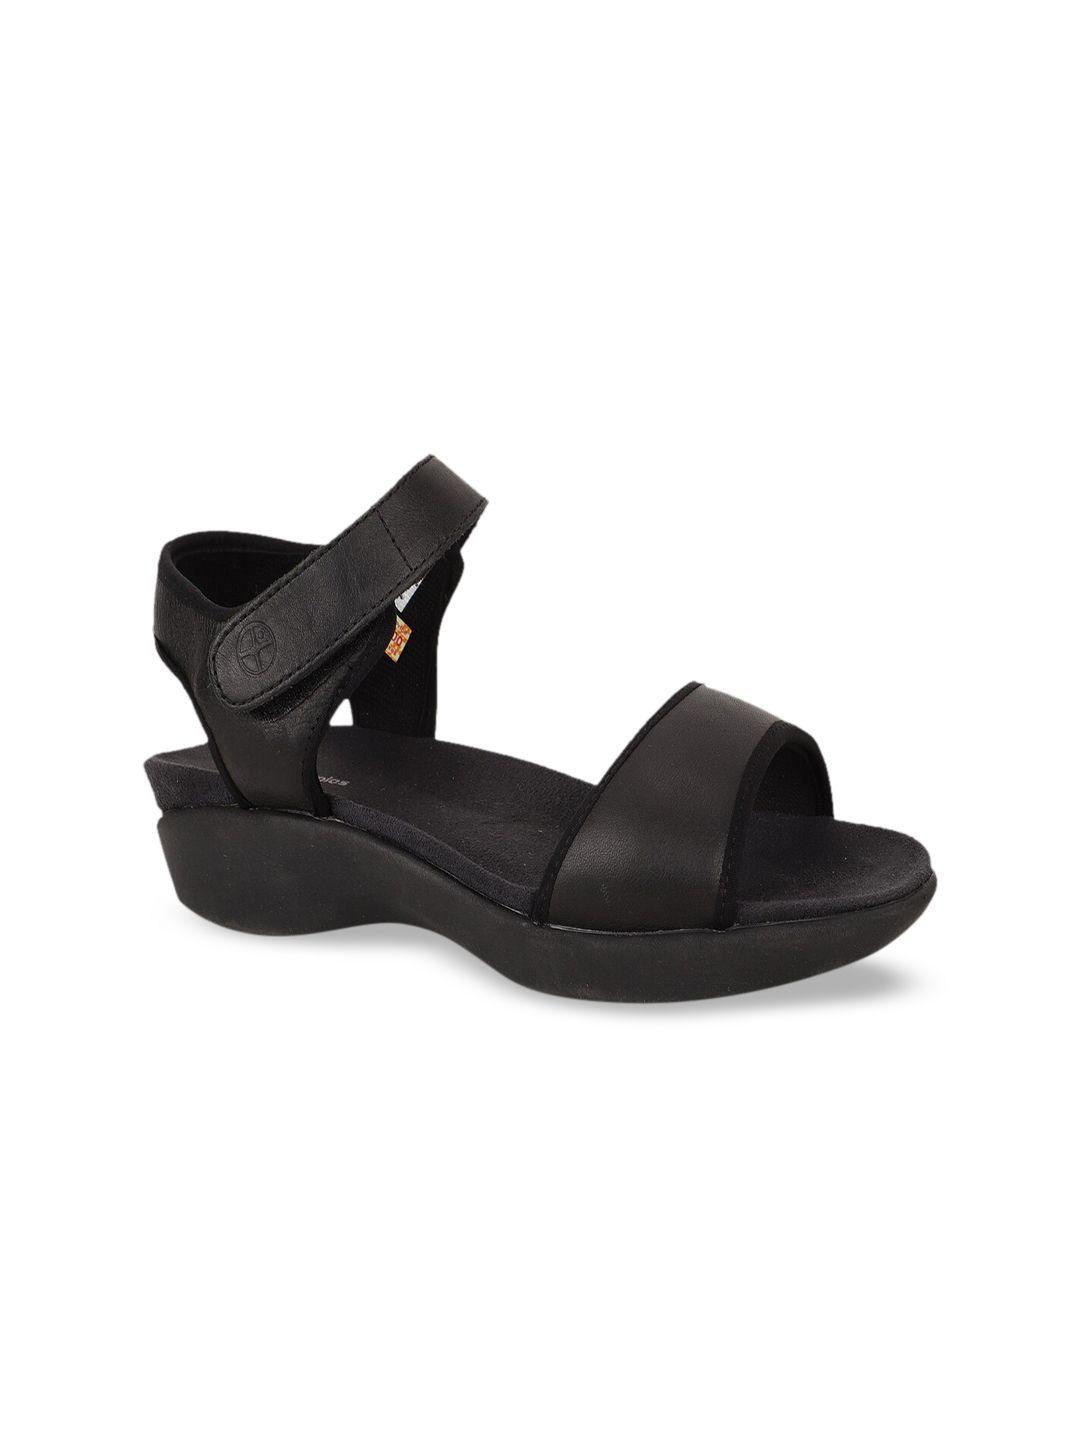 hush-puppies-black-leather-wedge-sandals